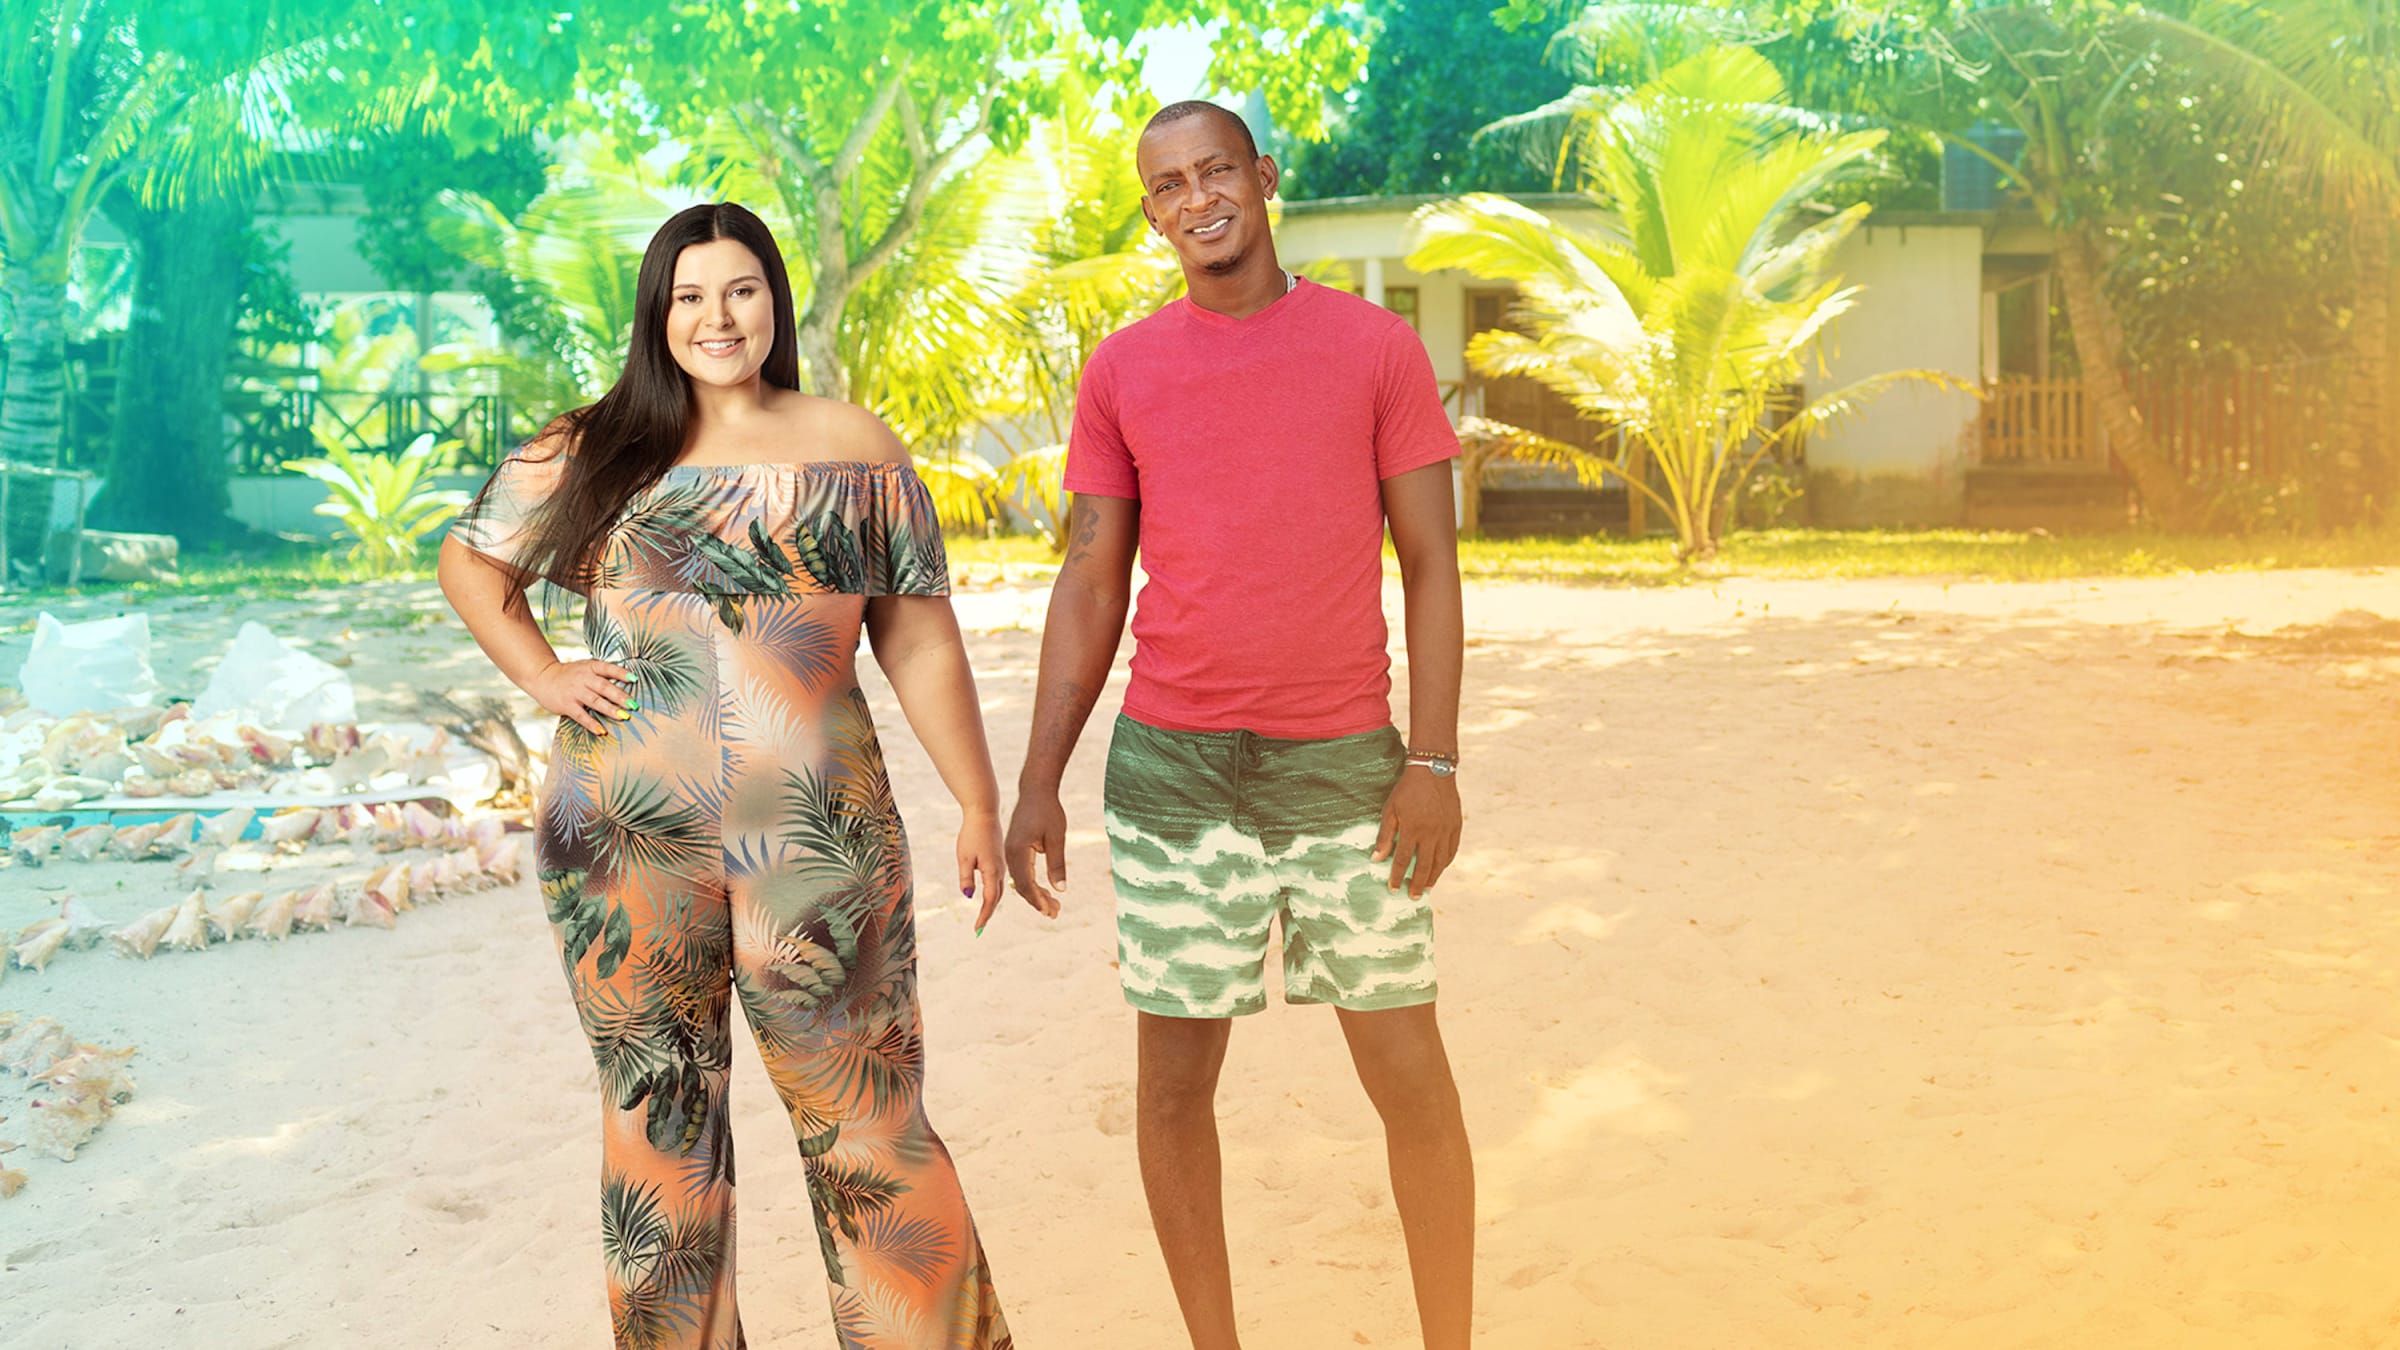 The Tropical ‘90 Day Fiancé’ Spinoff ‘Love in Paradise’ Is Your Next TV